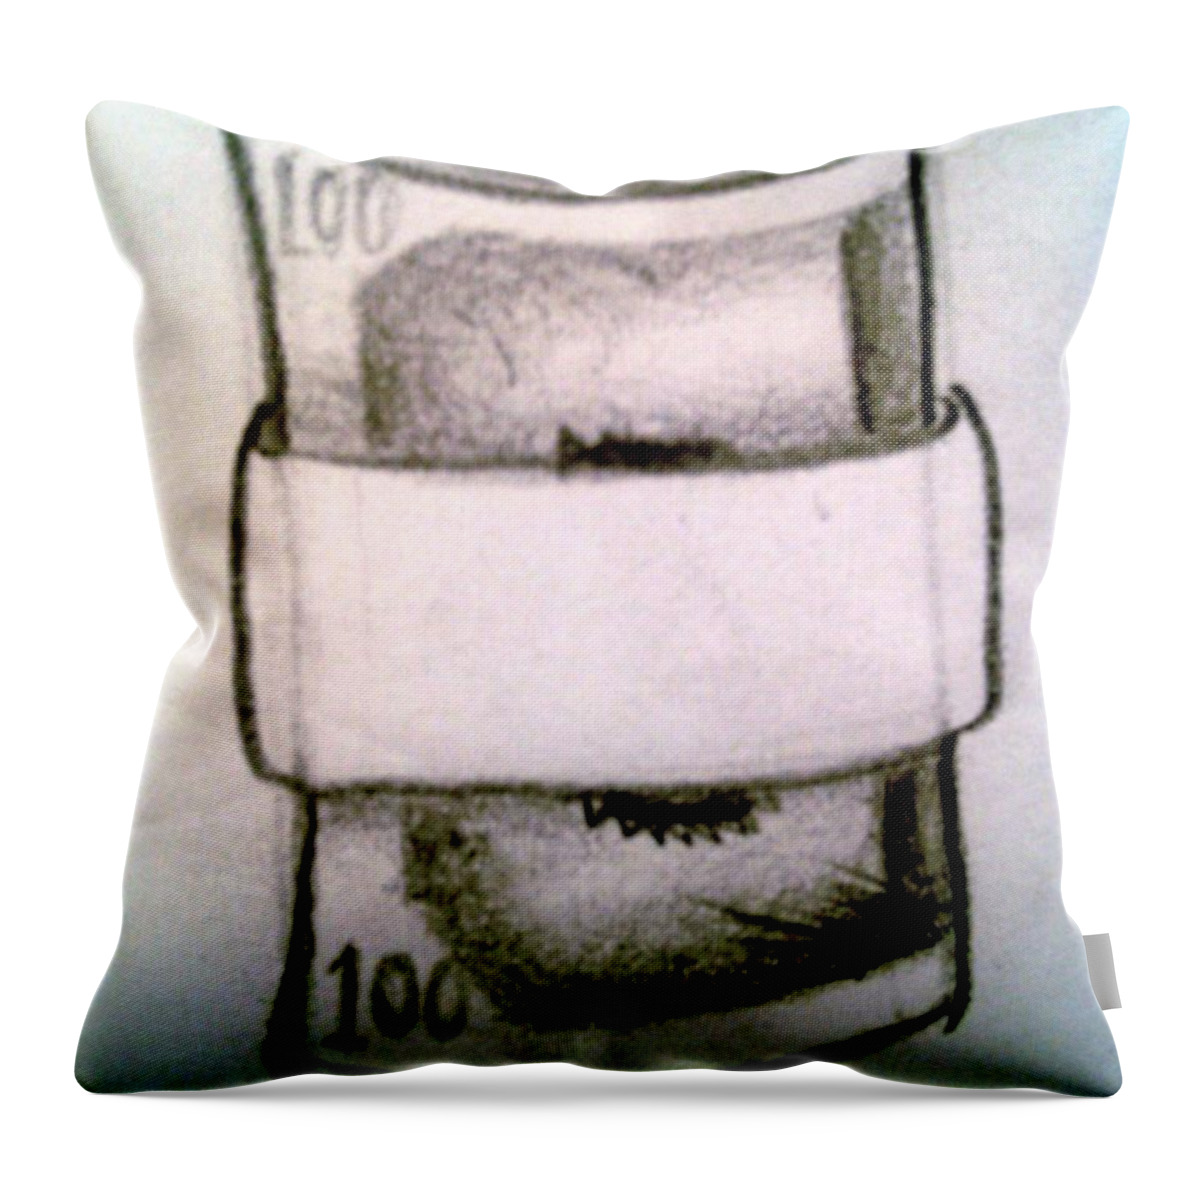 Black Art Throw Pillow featuring the drawing Untitled #16 by A S 